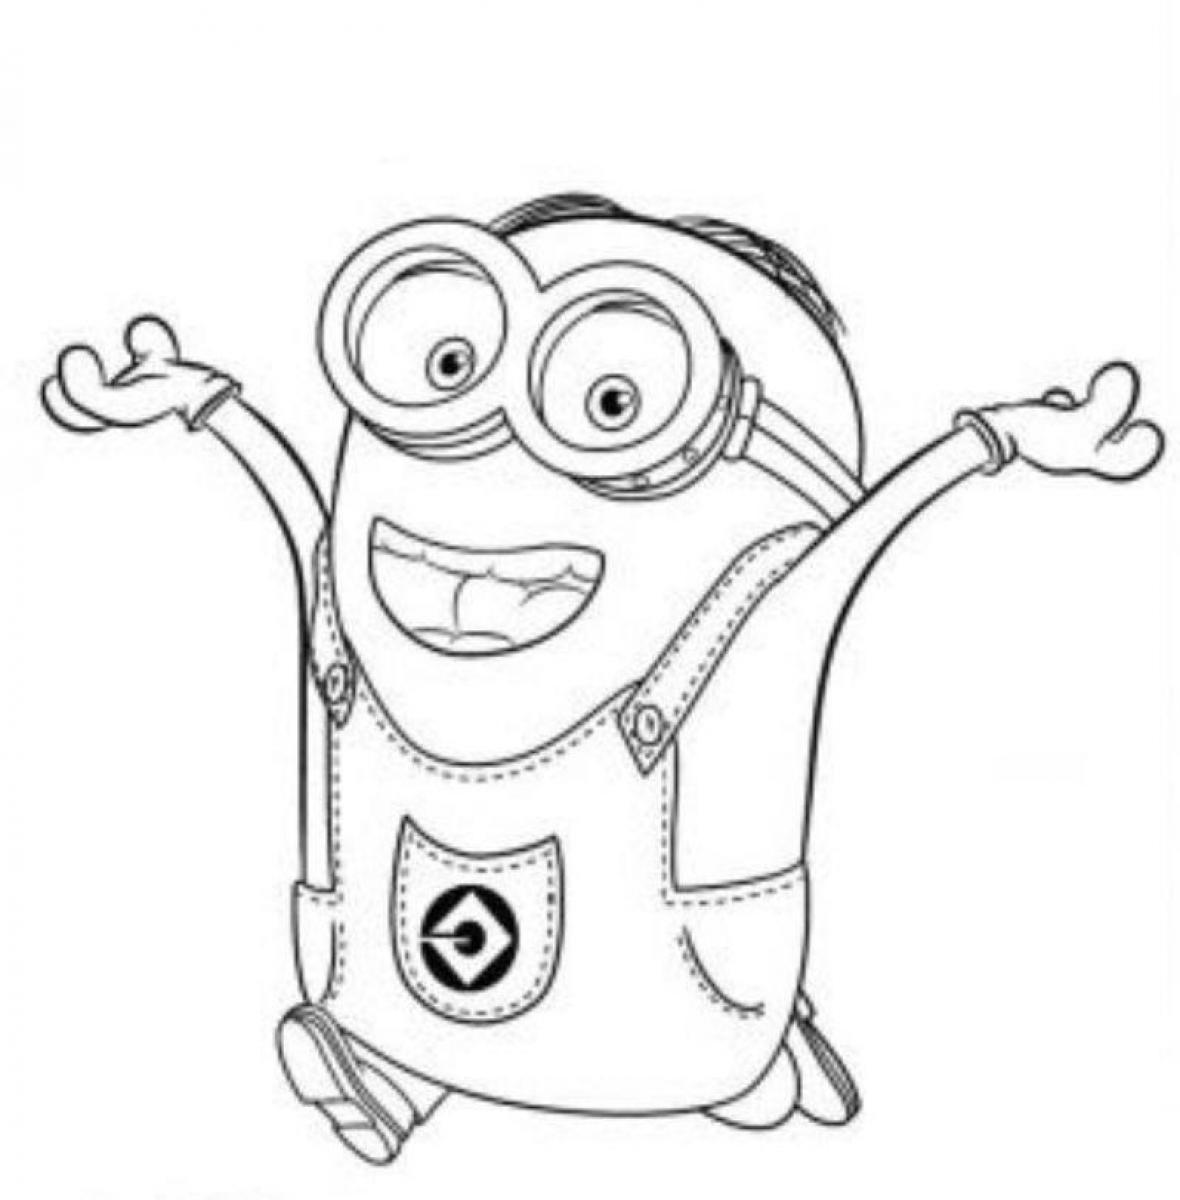 Minion Coloring Pages Printable Minion Coloring Pages Free Minion